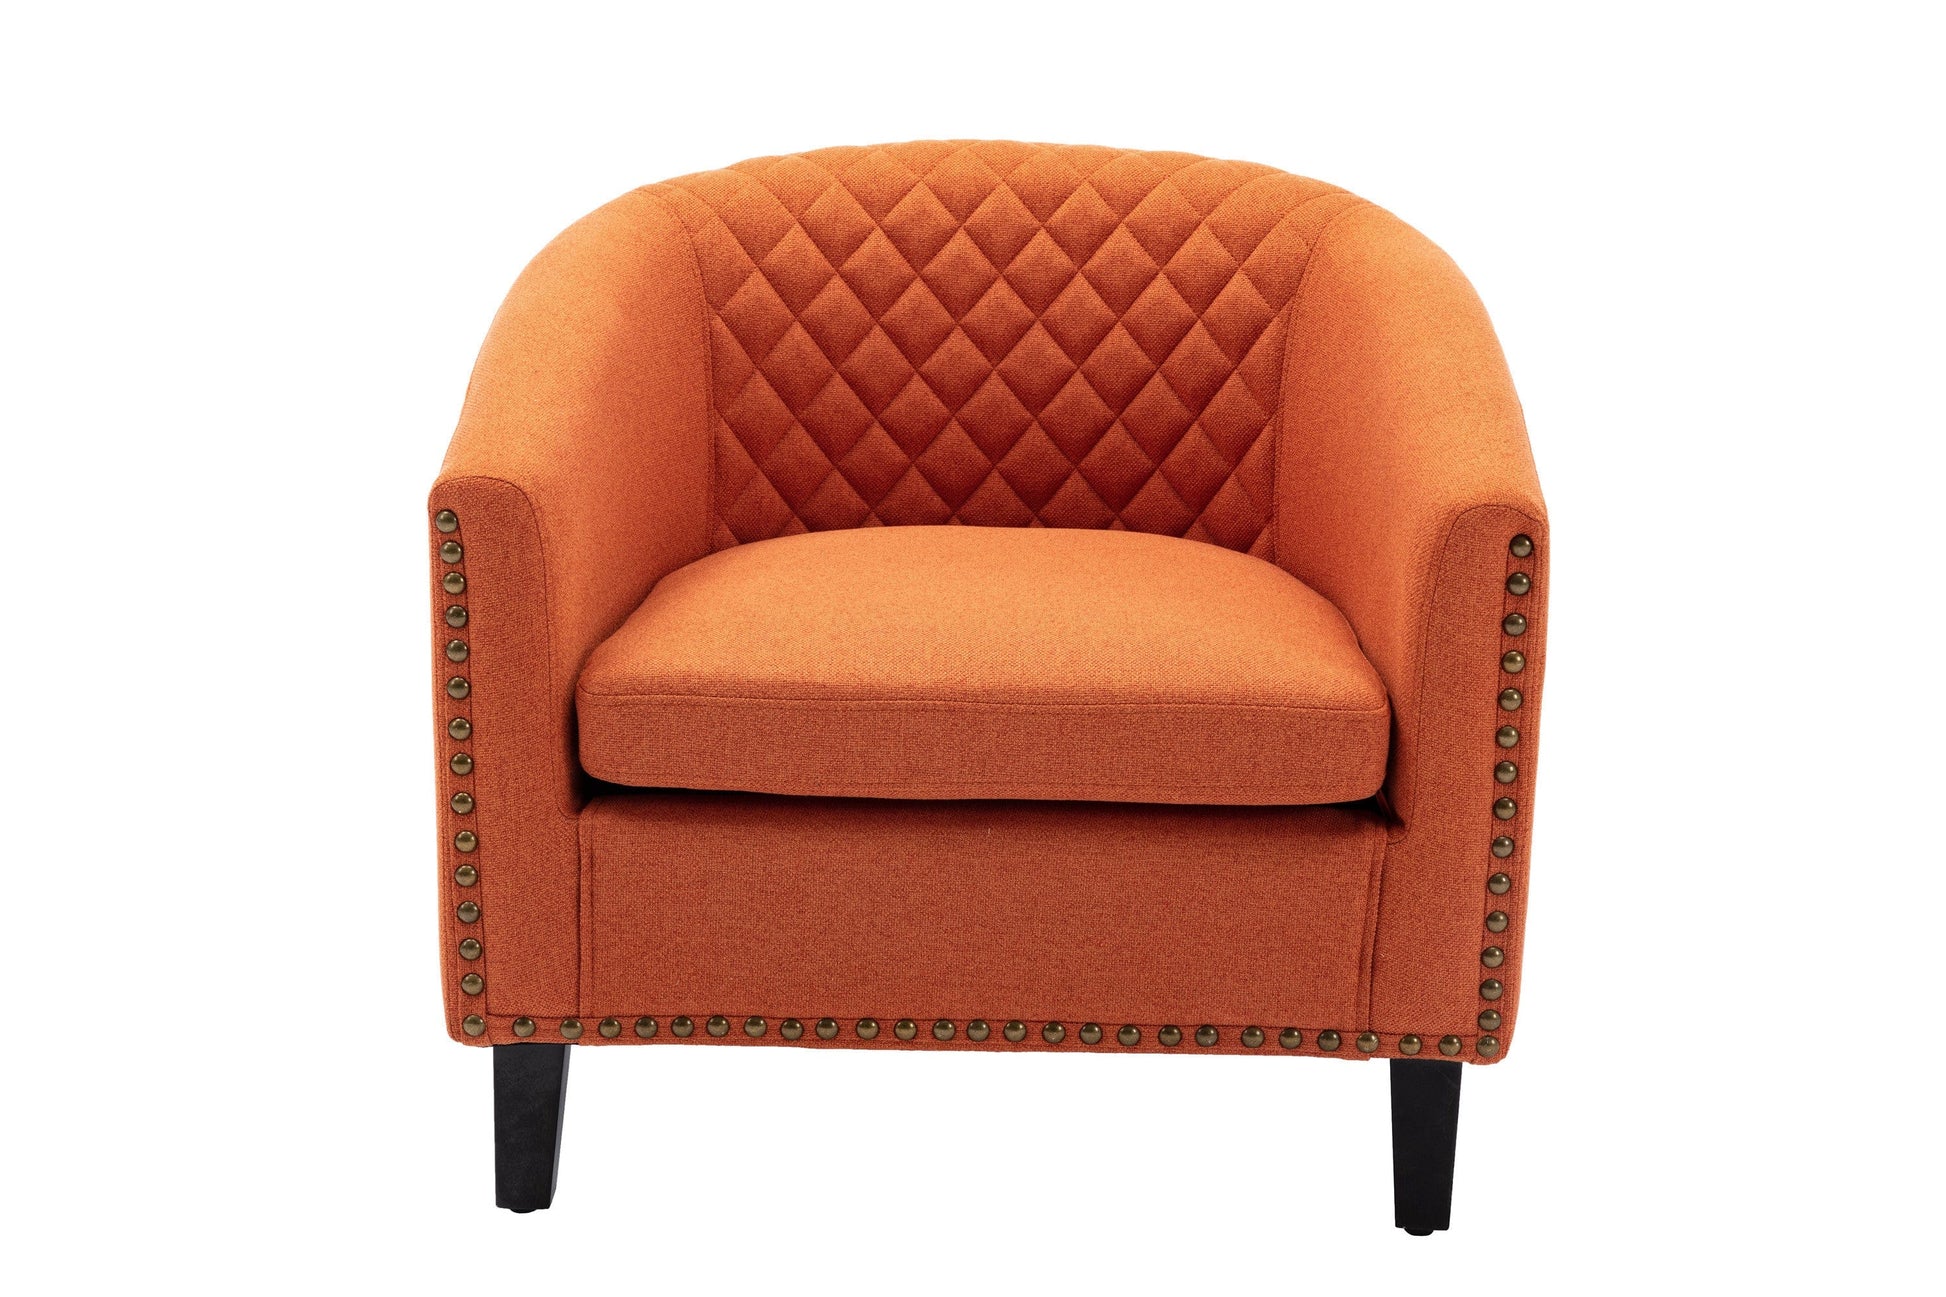 1st Choice Furniture Direct barrel Chair 1st Choice Modern Accent Barrel Chair with Nail heads in Orange Finish